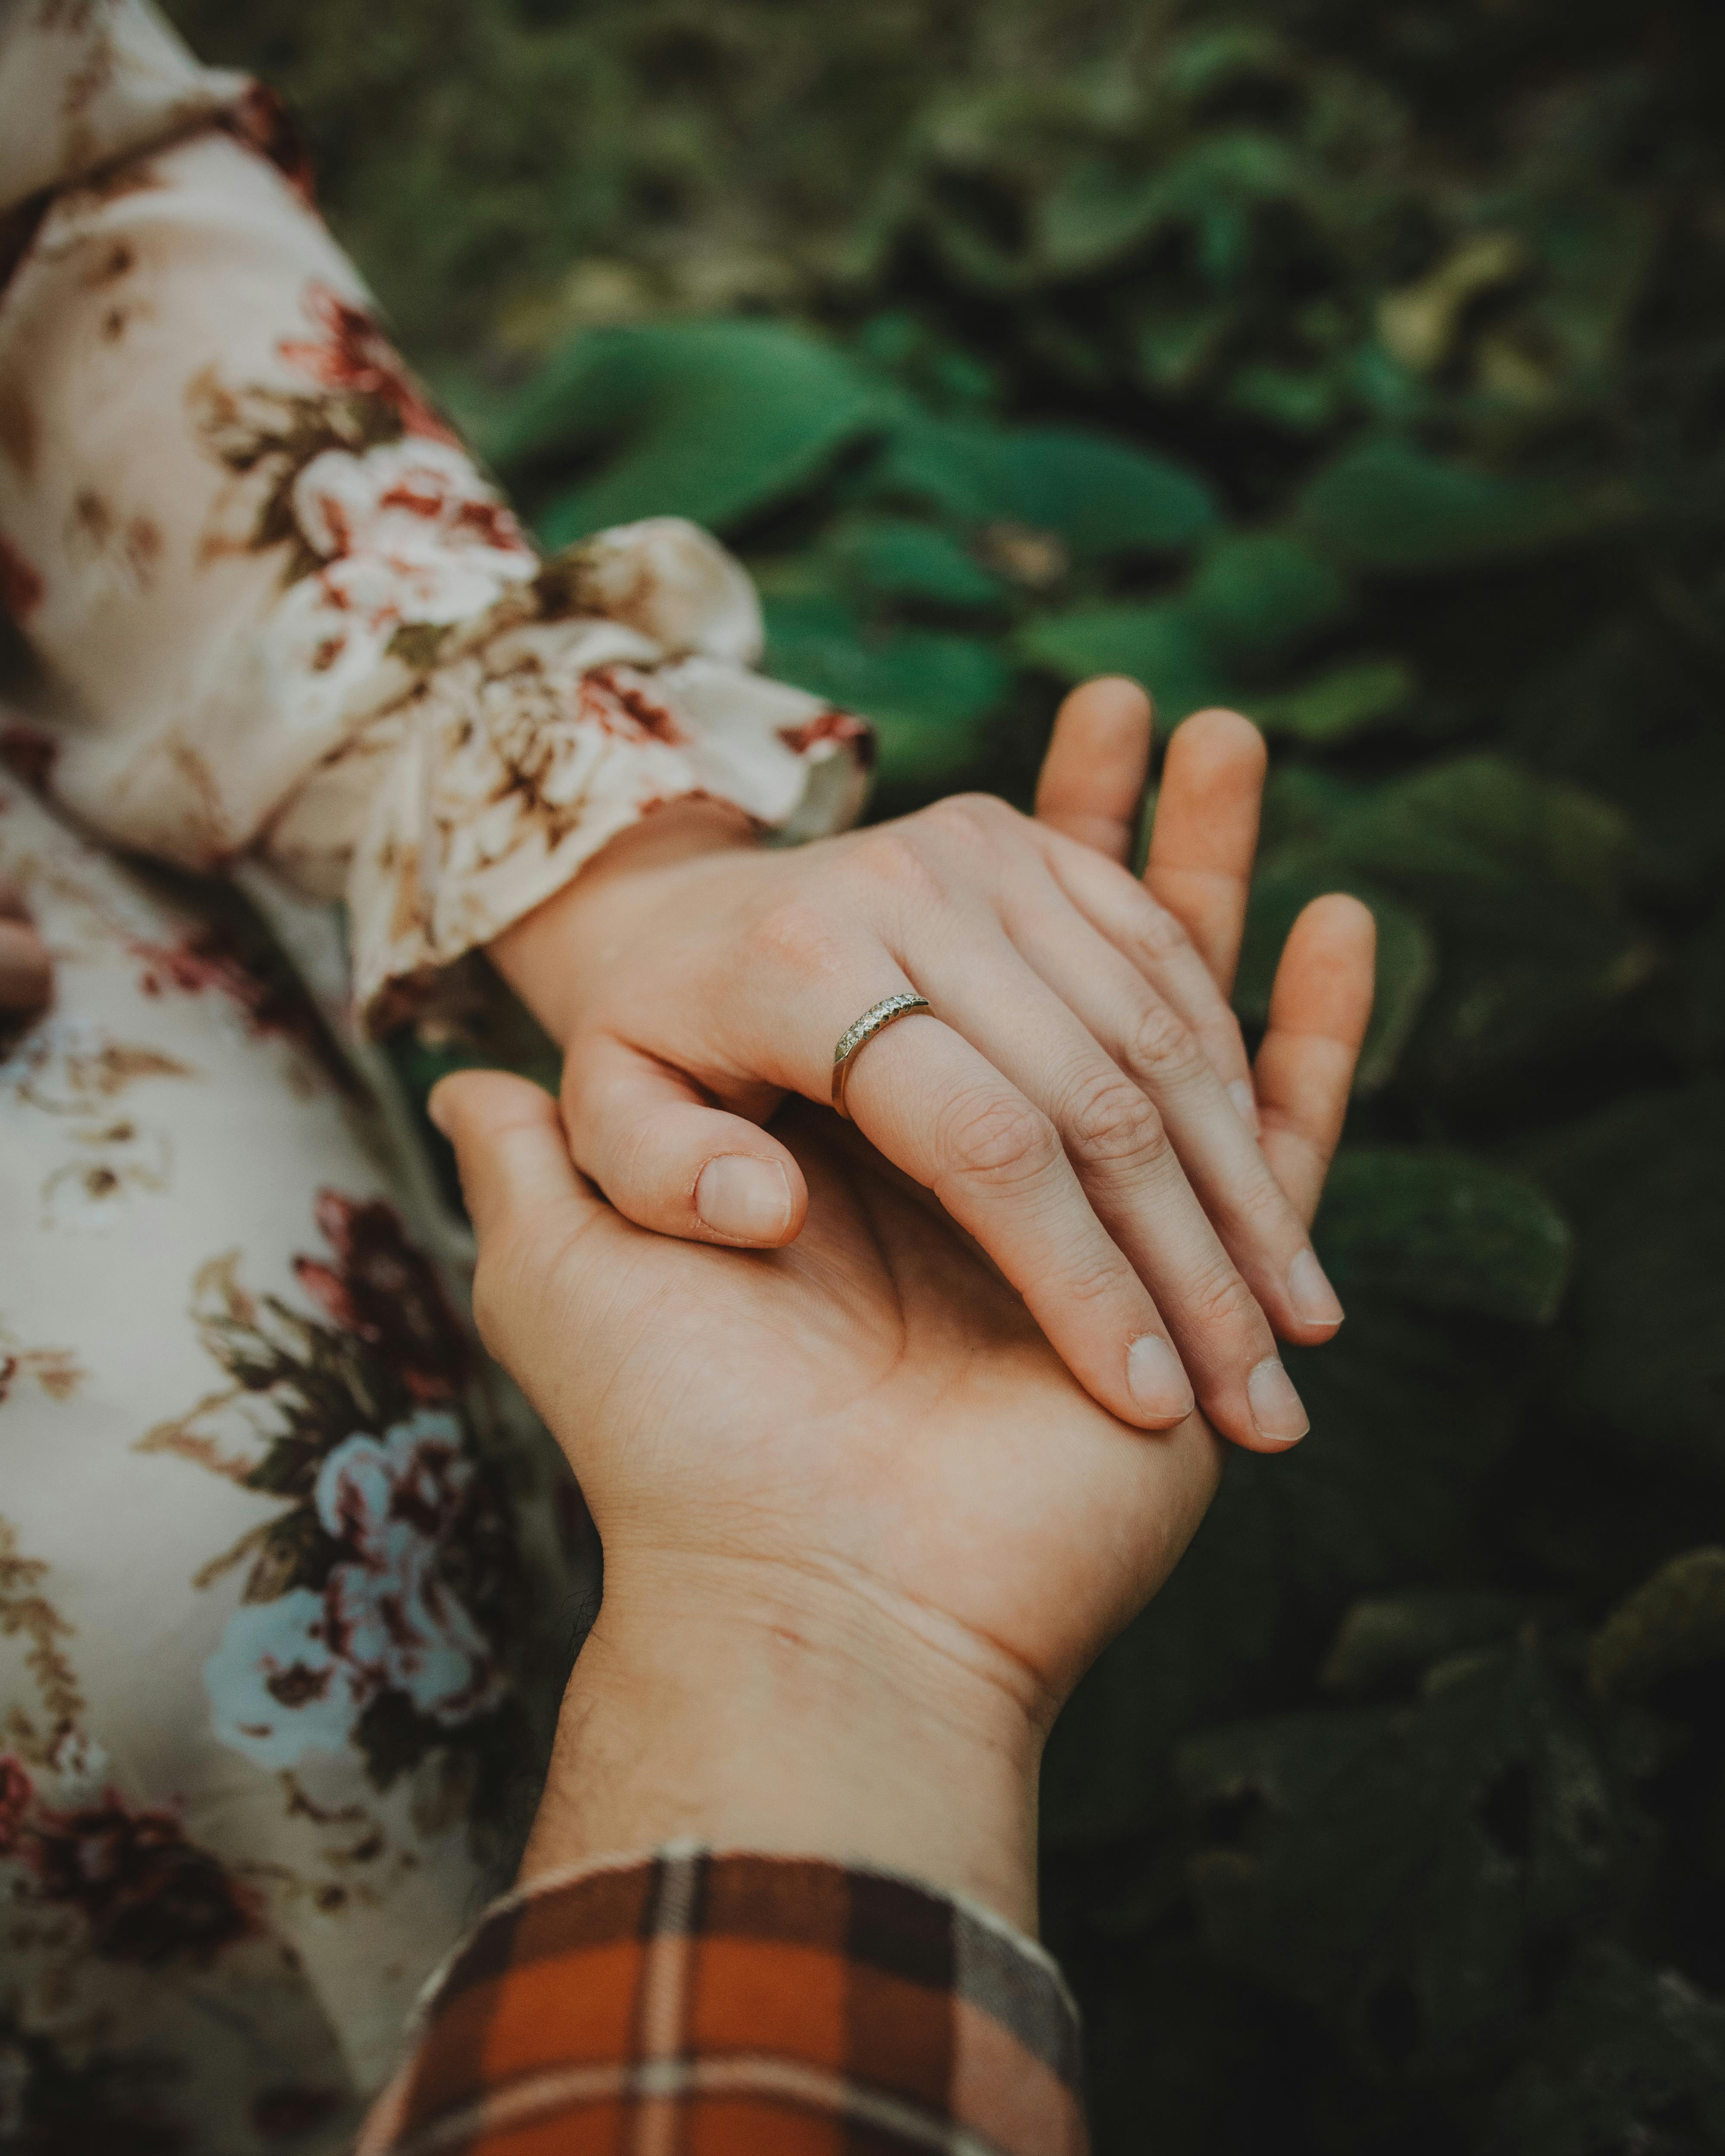 Man holding wife's hand | Source: Pexels